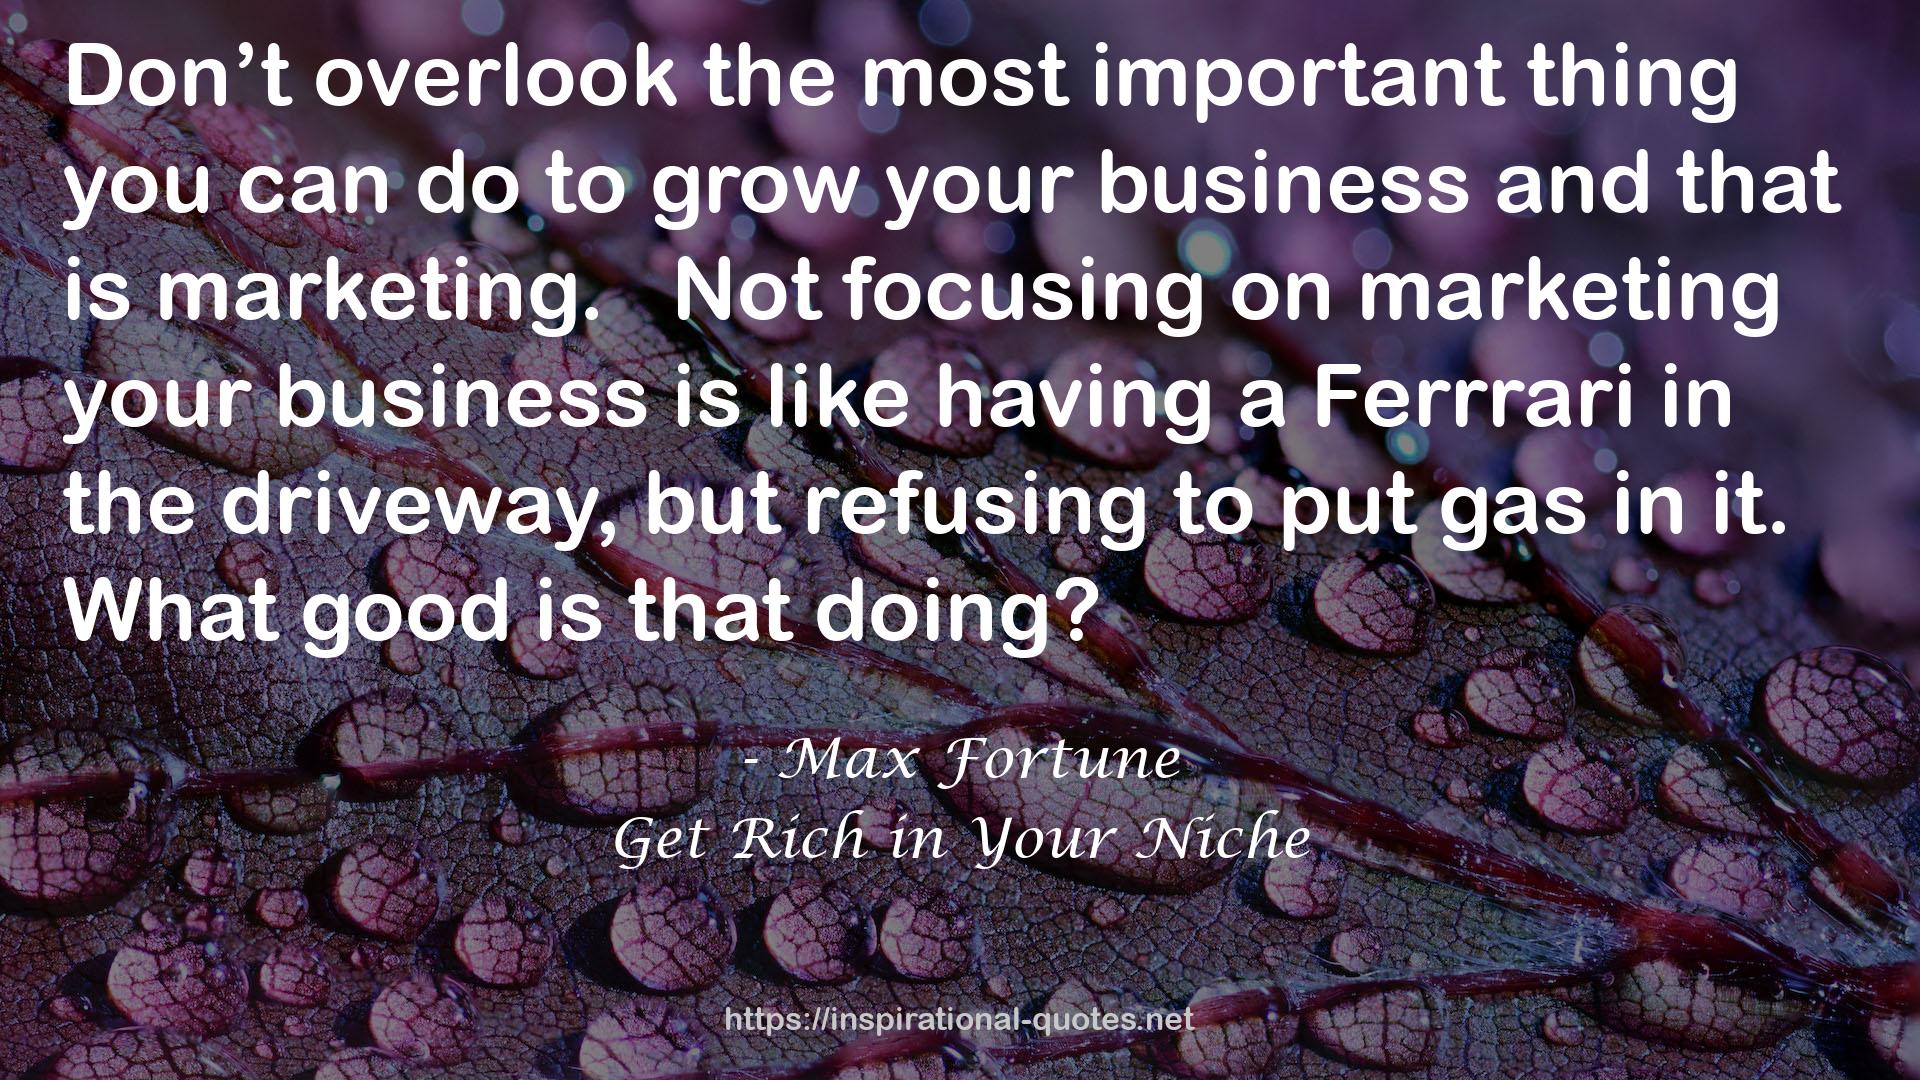 Get Rich in Your Niche QUOTES